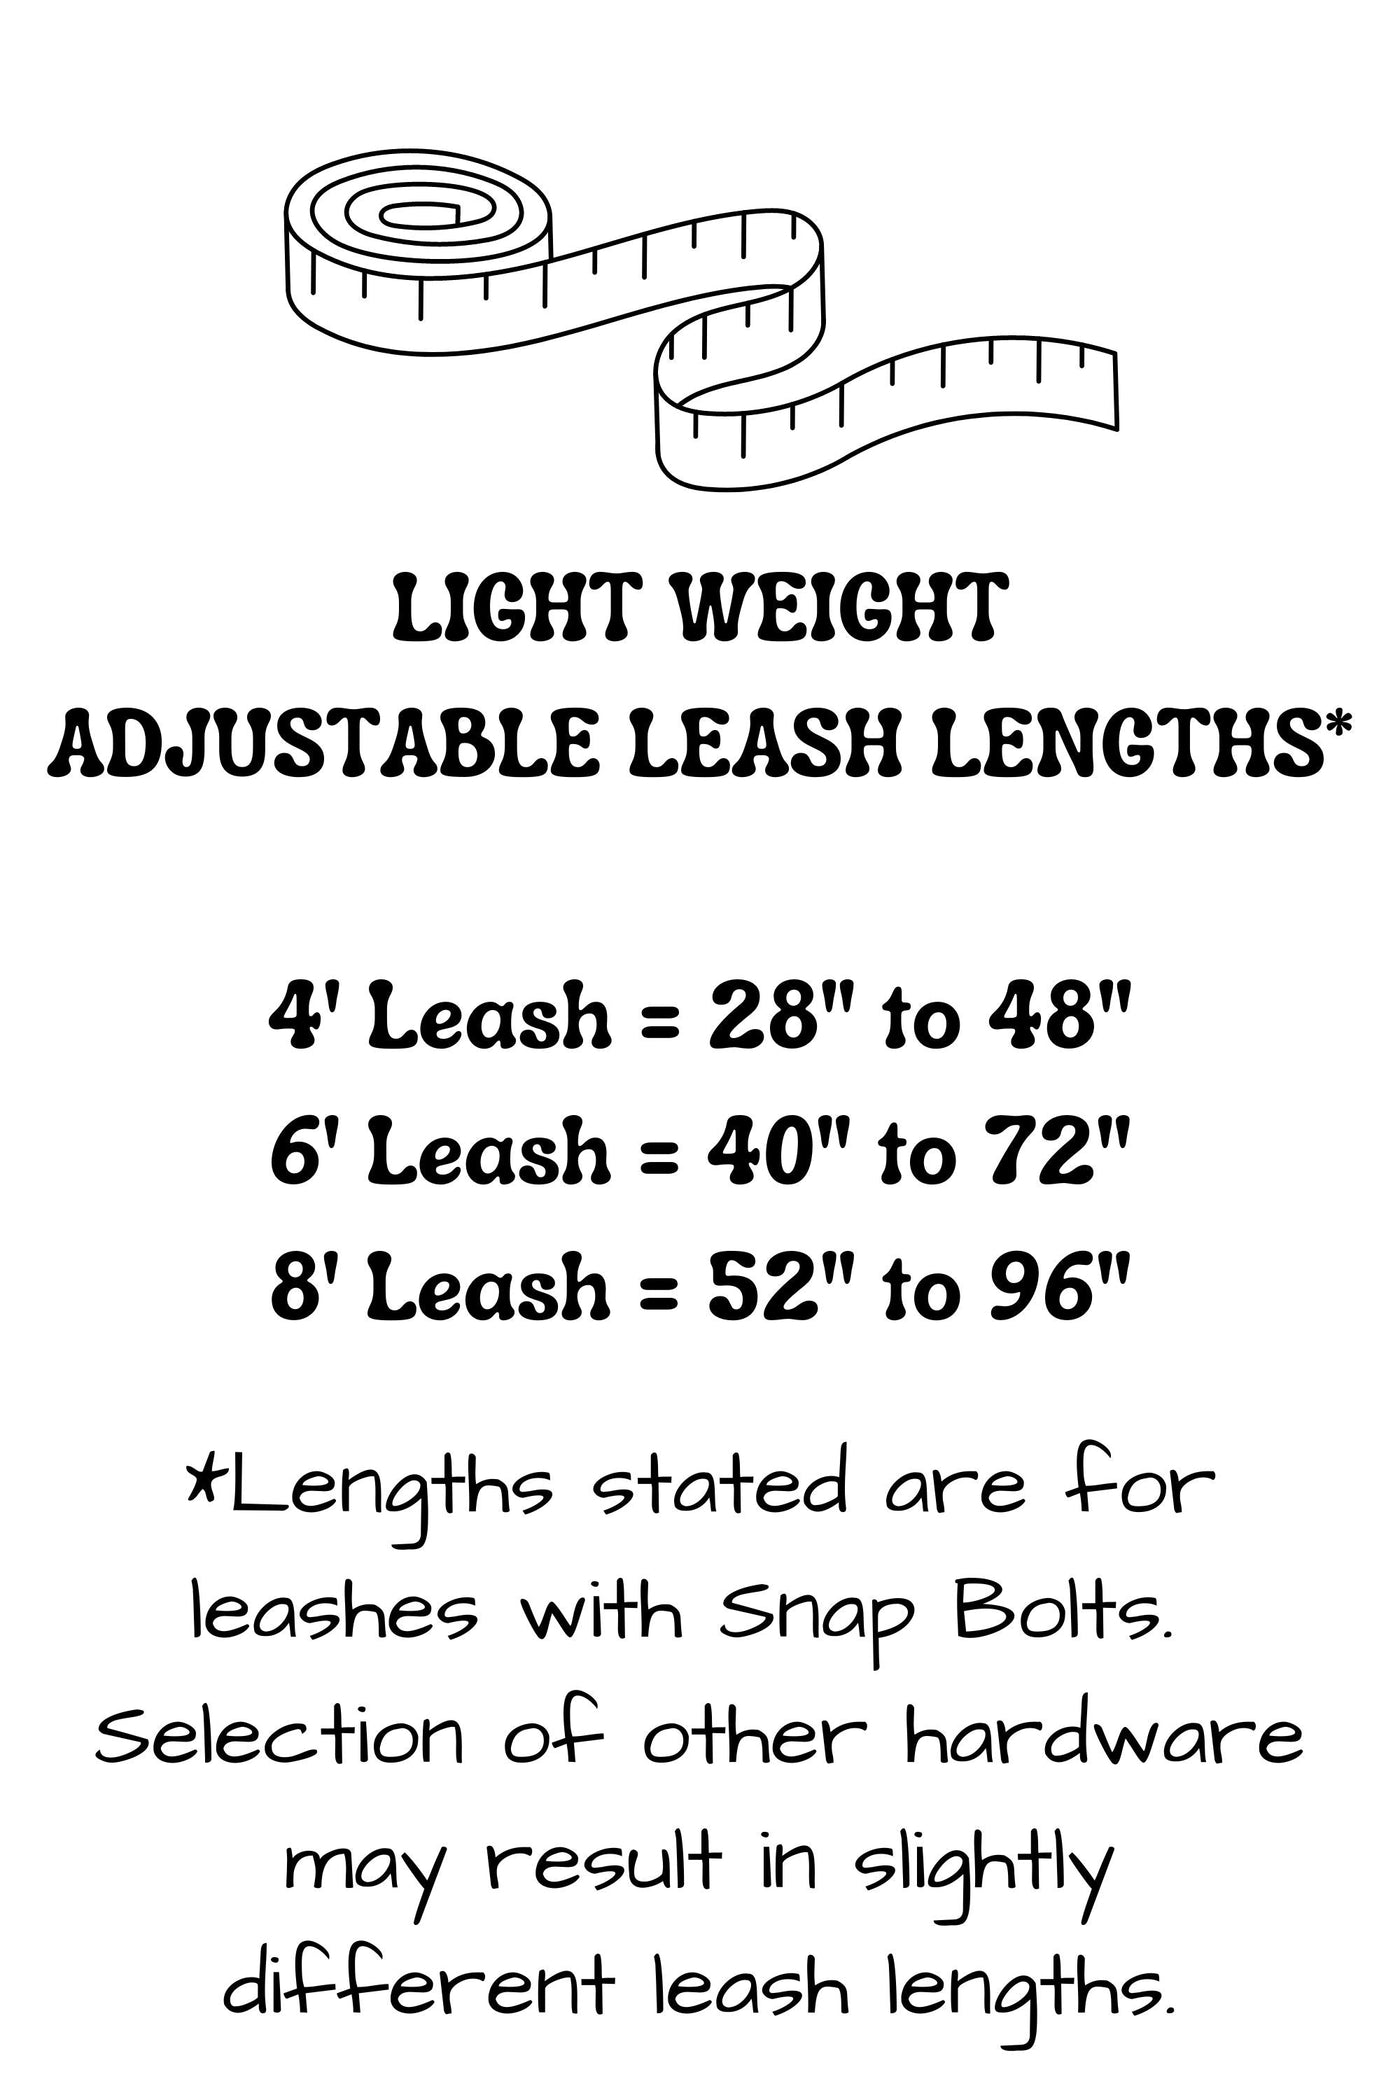 Adjustable length hands free leash lengths provide the following adjustability: 4 foot leash adjusts from 28 inches to 48 inches, 6 foot leash adjusts from 40 inches to 72 inches, and the 8 foot leash adjusts from 52 inches to 96 inches. Lengths stated may vary slightly with selection of hardware.